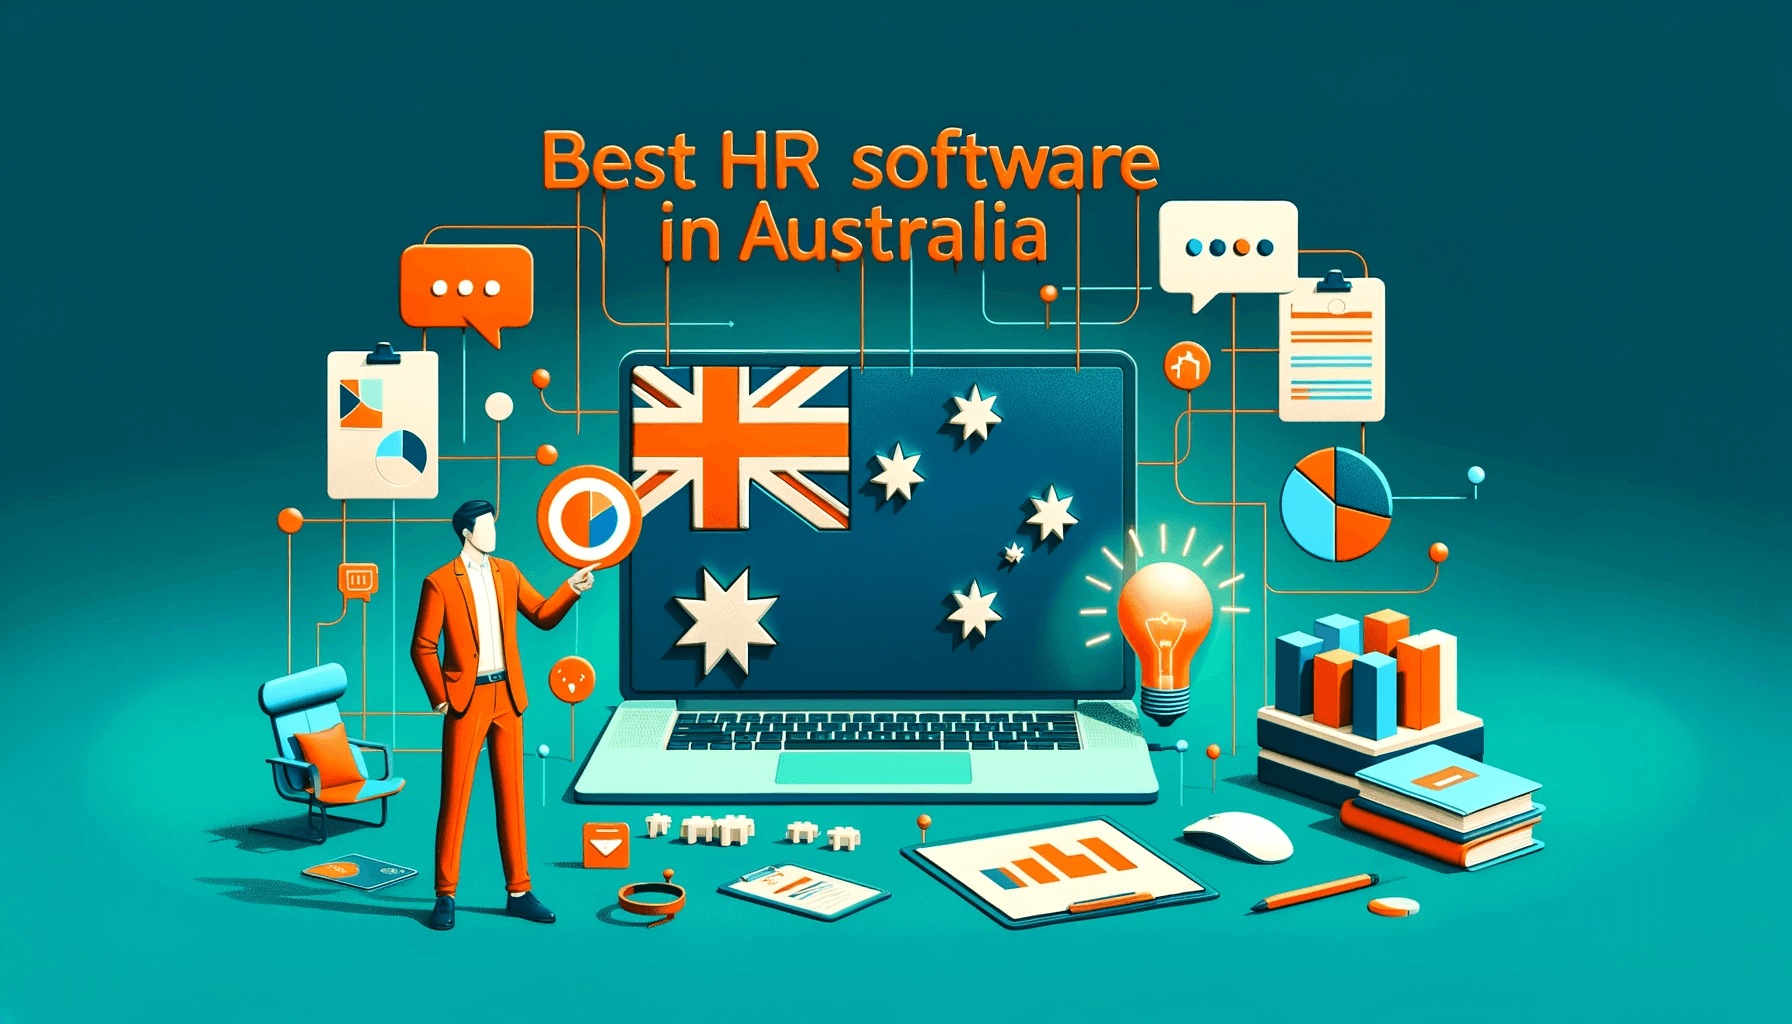 Hero image for "Best HR Software in Australia" with an Australian flag on a laptop and HR software systems symbols around it.